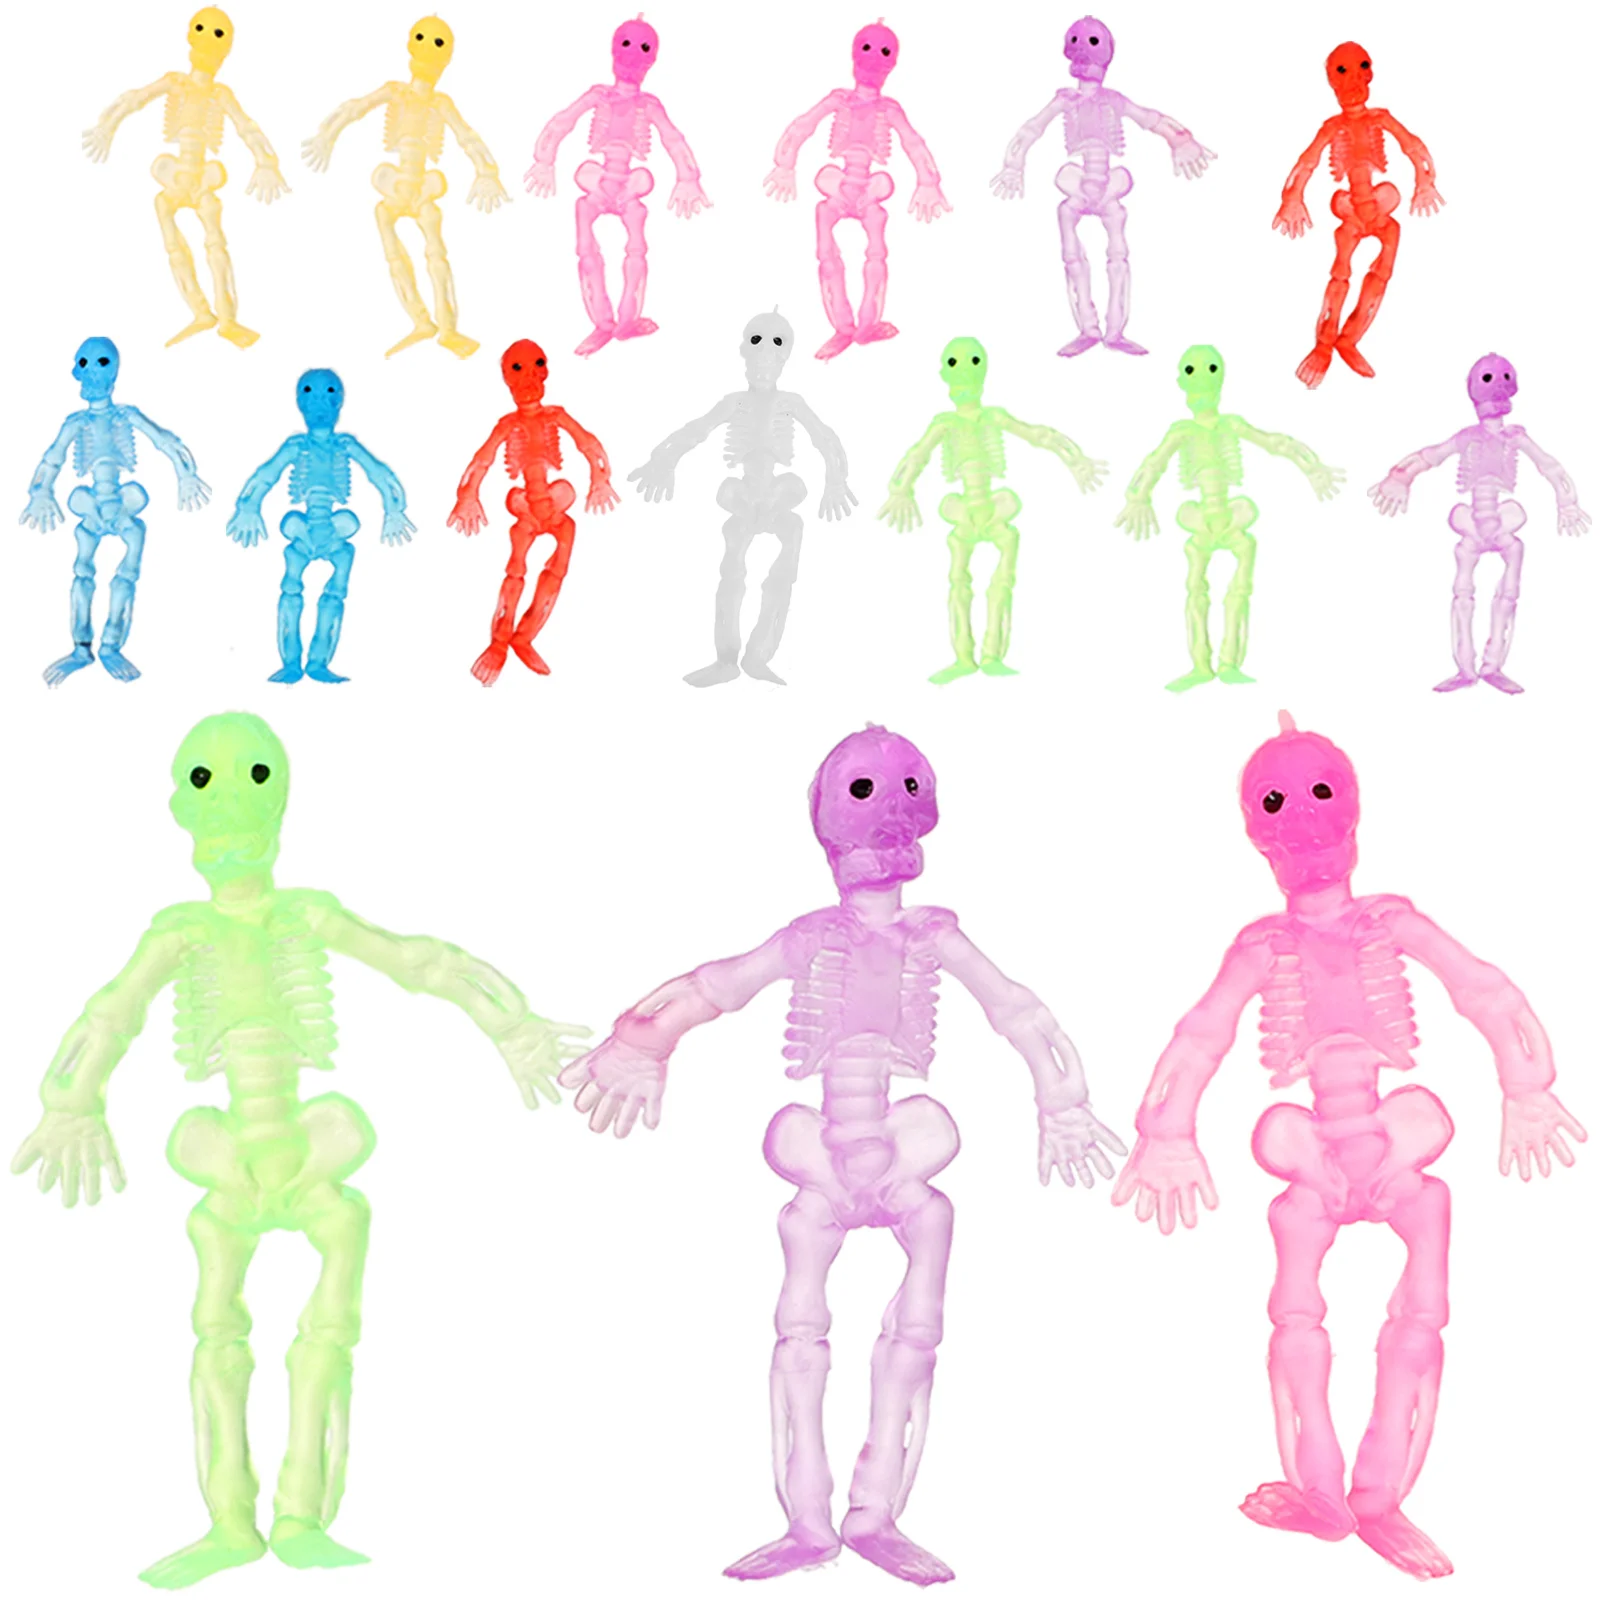 

20 Pcs Colorful Toy Stretchy Skeletons Toys Relaxing Portable Reliever Children Tpr Funny Vent Halloween